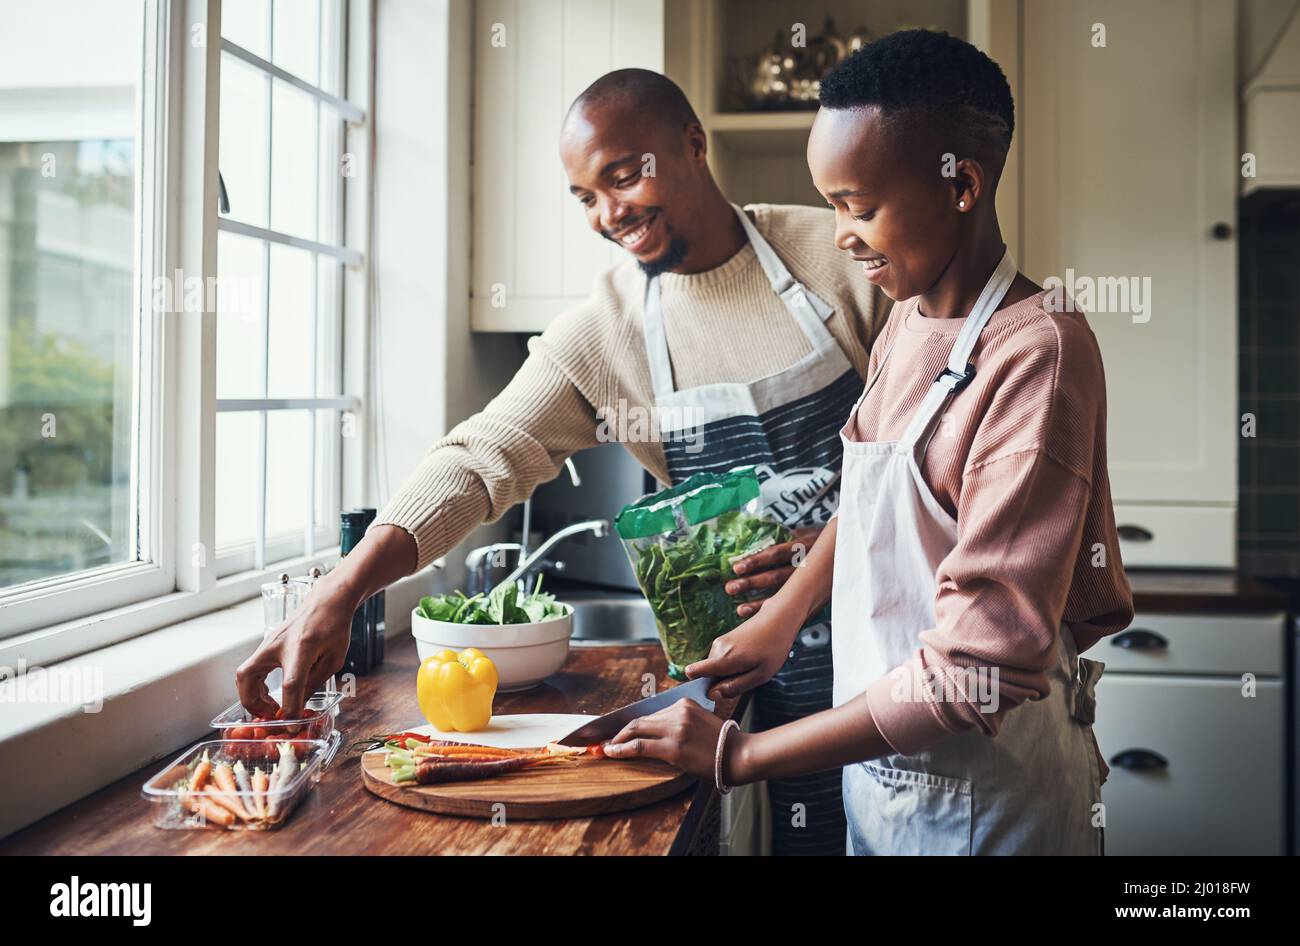 Preparing dinner together. Cropped shot of an affectionate young couple preparing dinner in their kitchen. Stock Photo